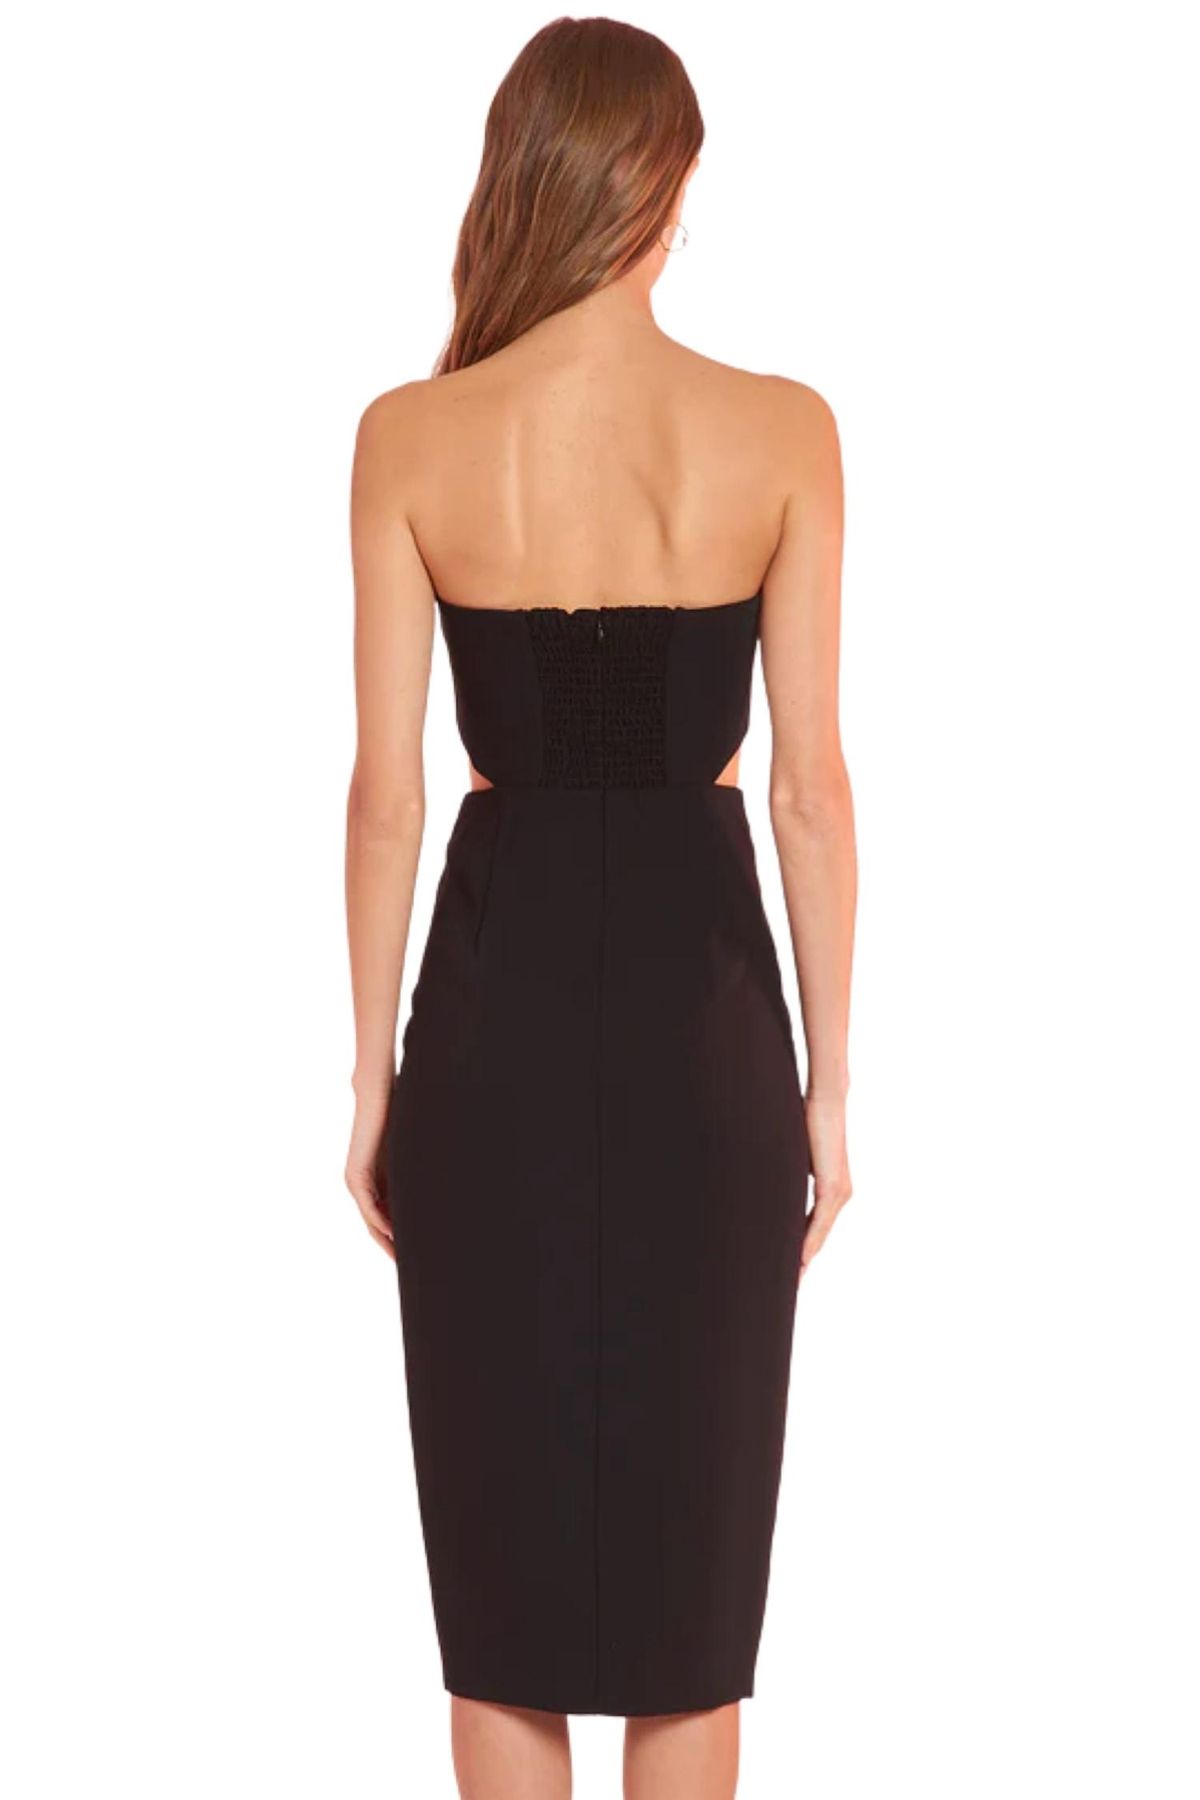 Style 1-2866584008-3236 Amanda Uprichard Size S Black Cocktail Dress on Queenly